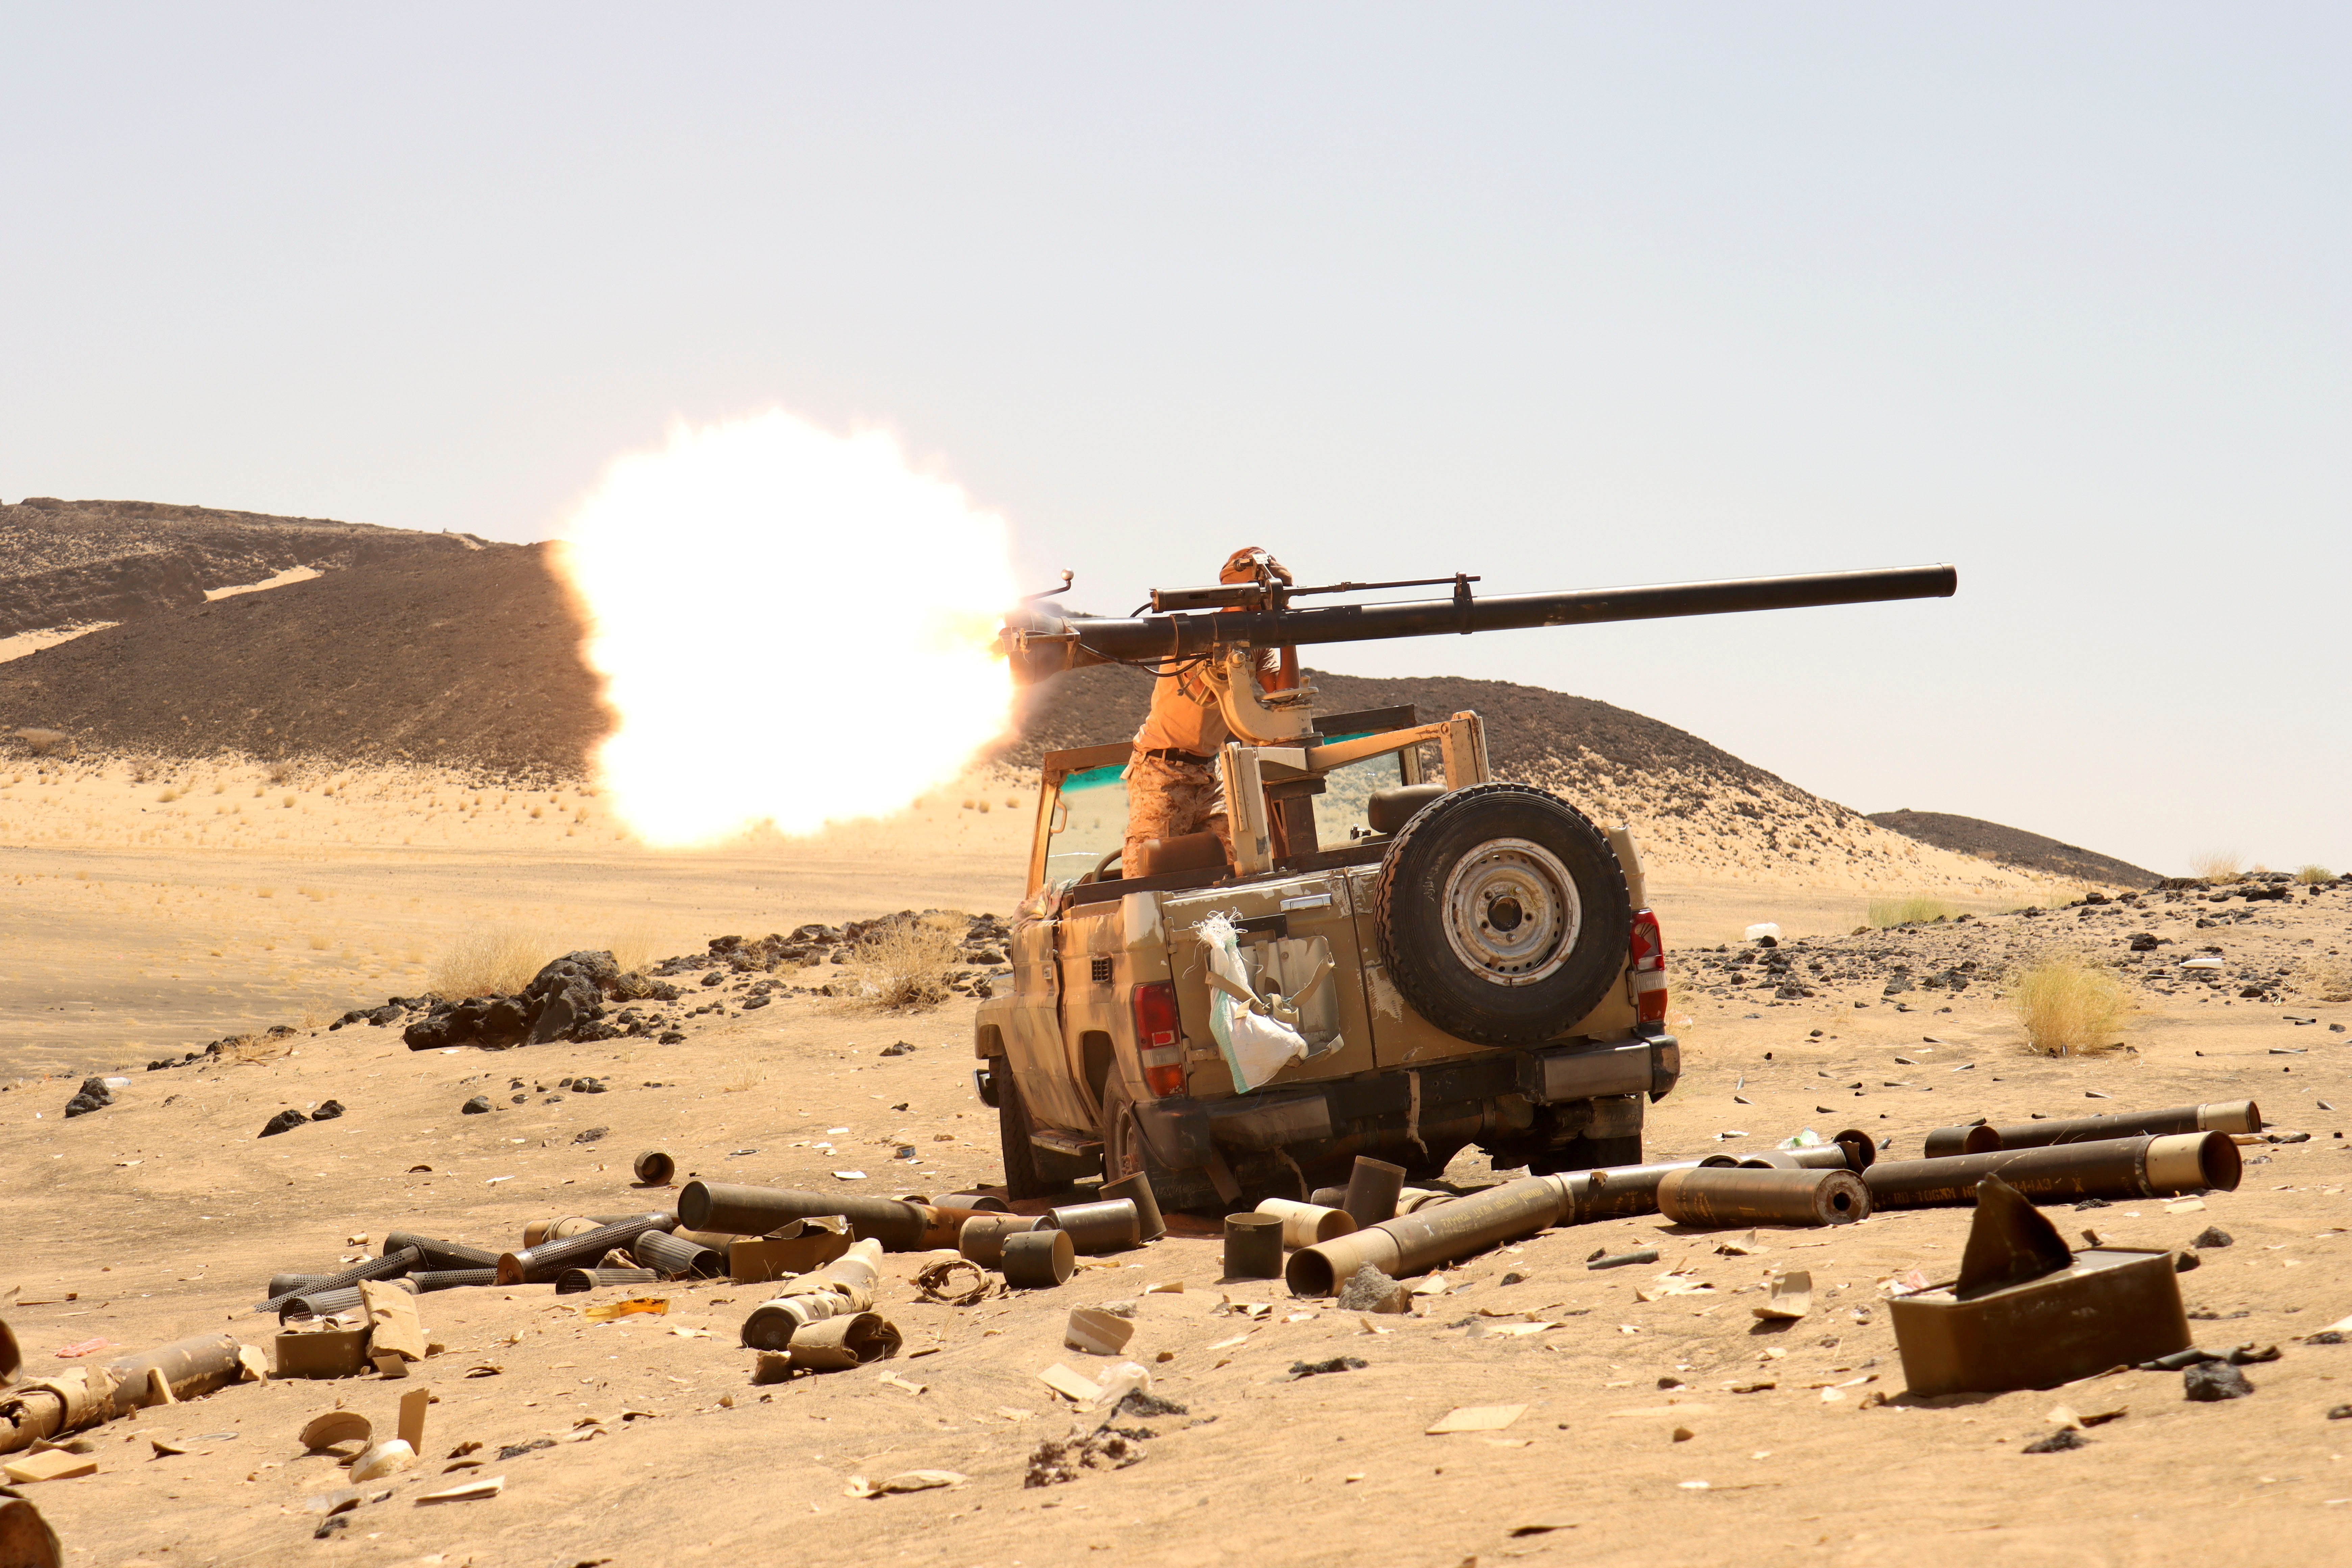 Yemeni government fighter fires a vehicle-mounted weapon at a frontline position during fighting against Houthi fighters in Marib